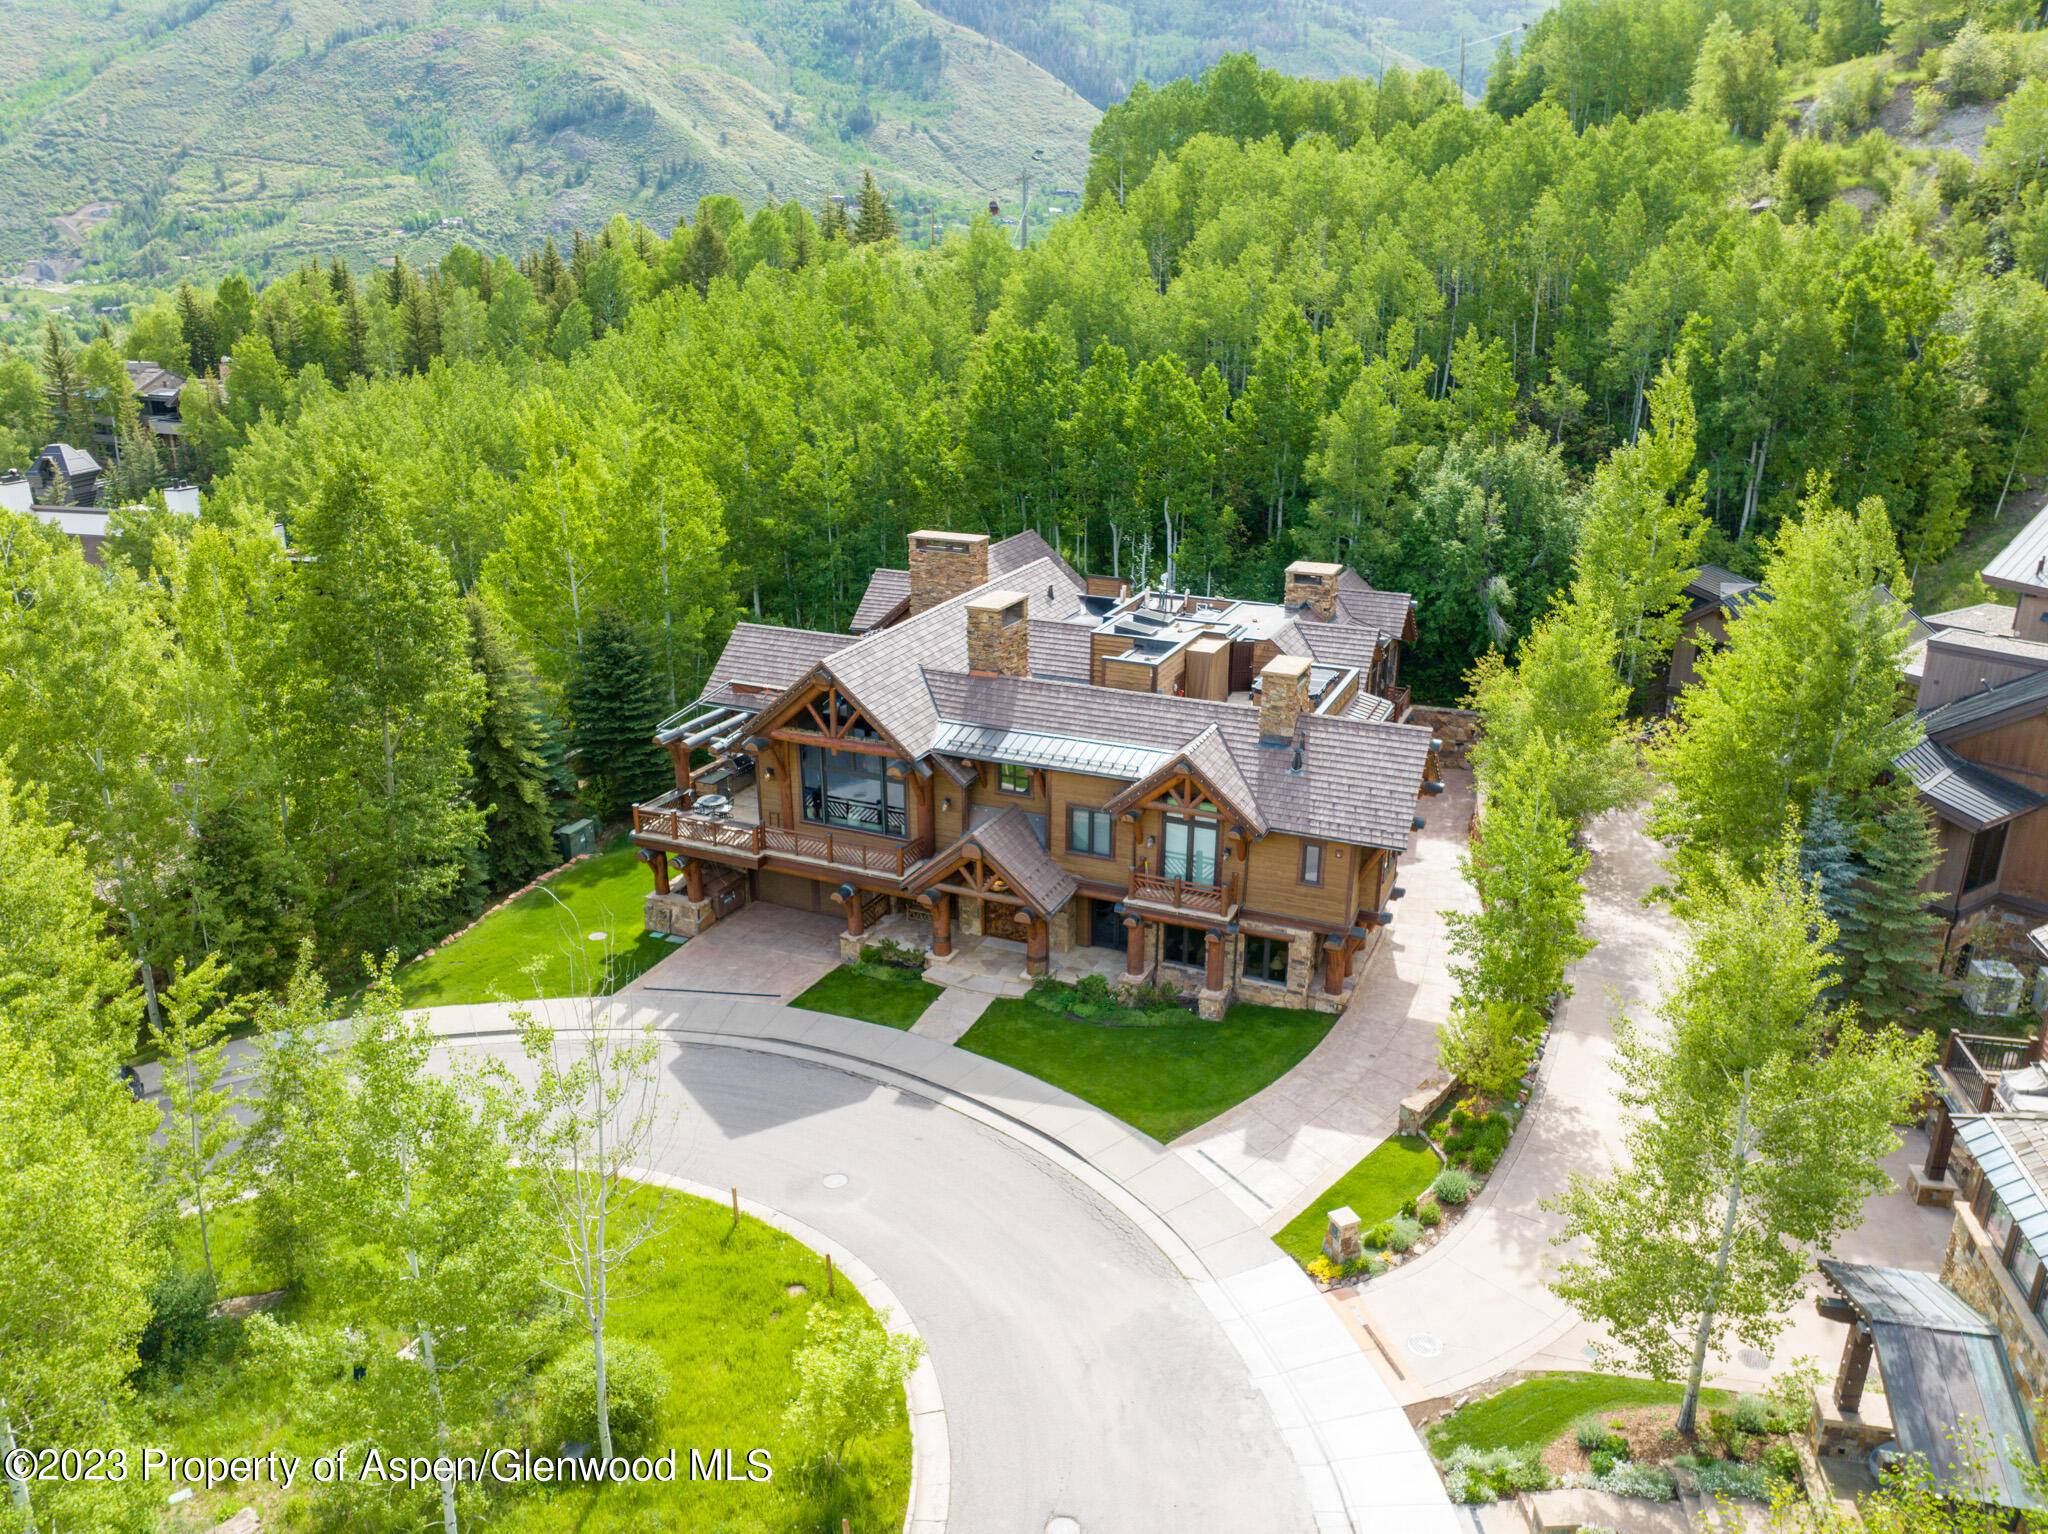 This well appointed home has all you need to enjoy Aspen in style.